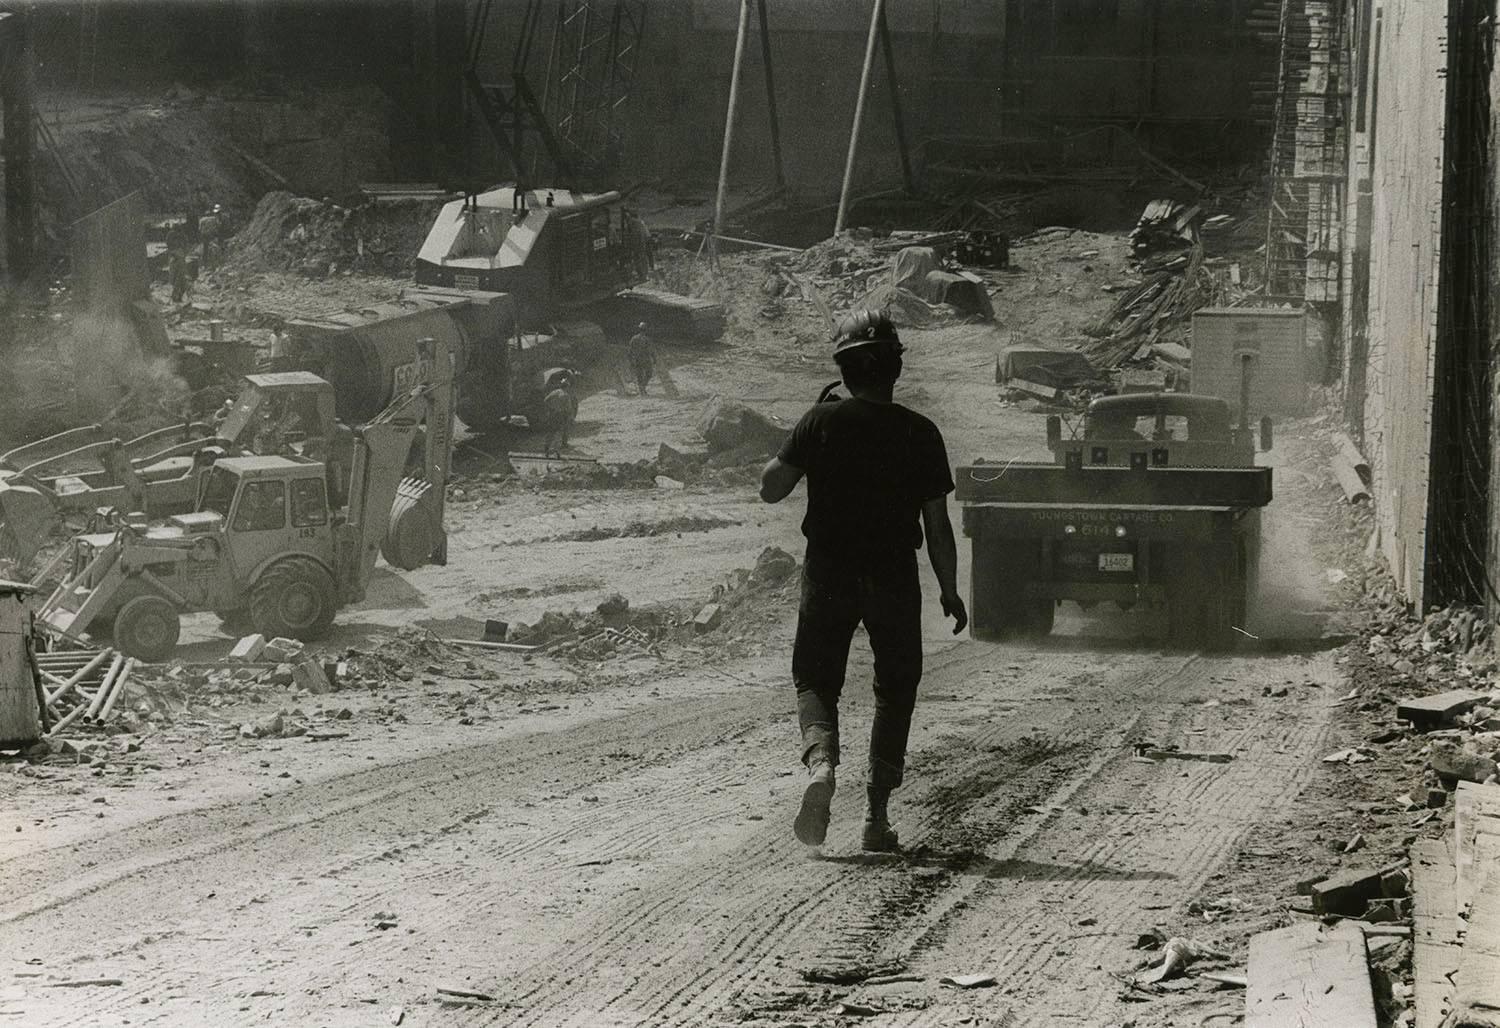 Alfred Statler Black and White Photograph - New York City Construction Site